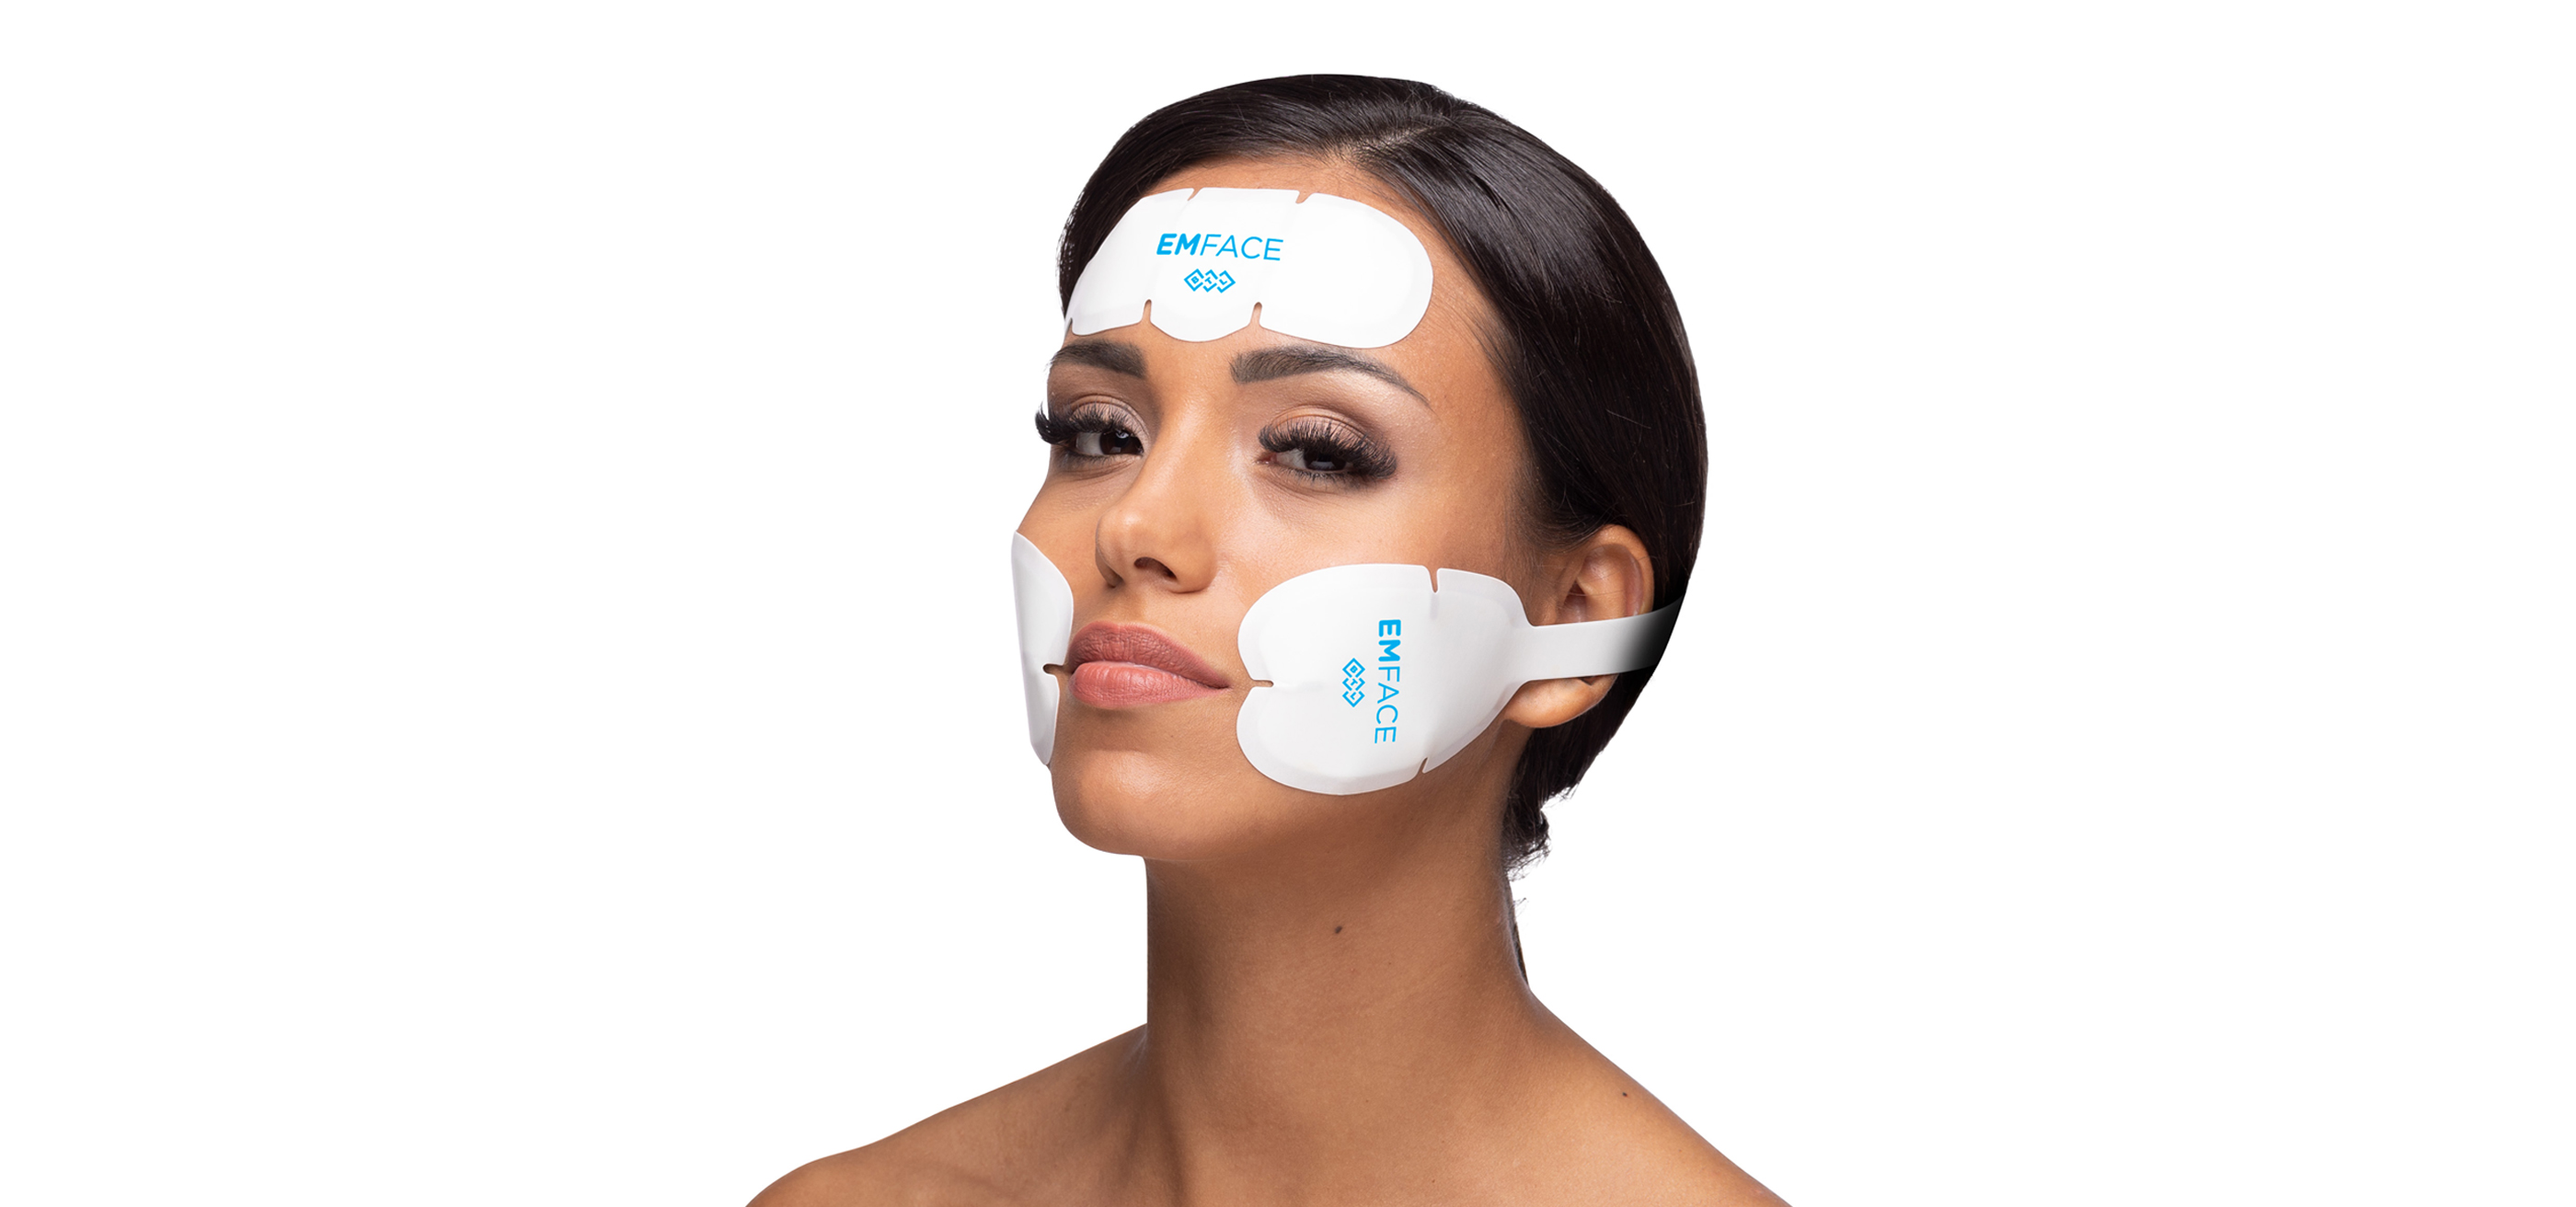 EmFace: the magic of a facelift without a needle